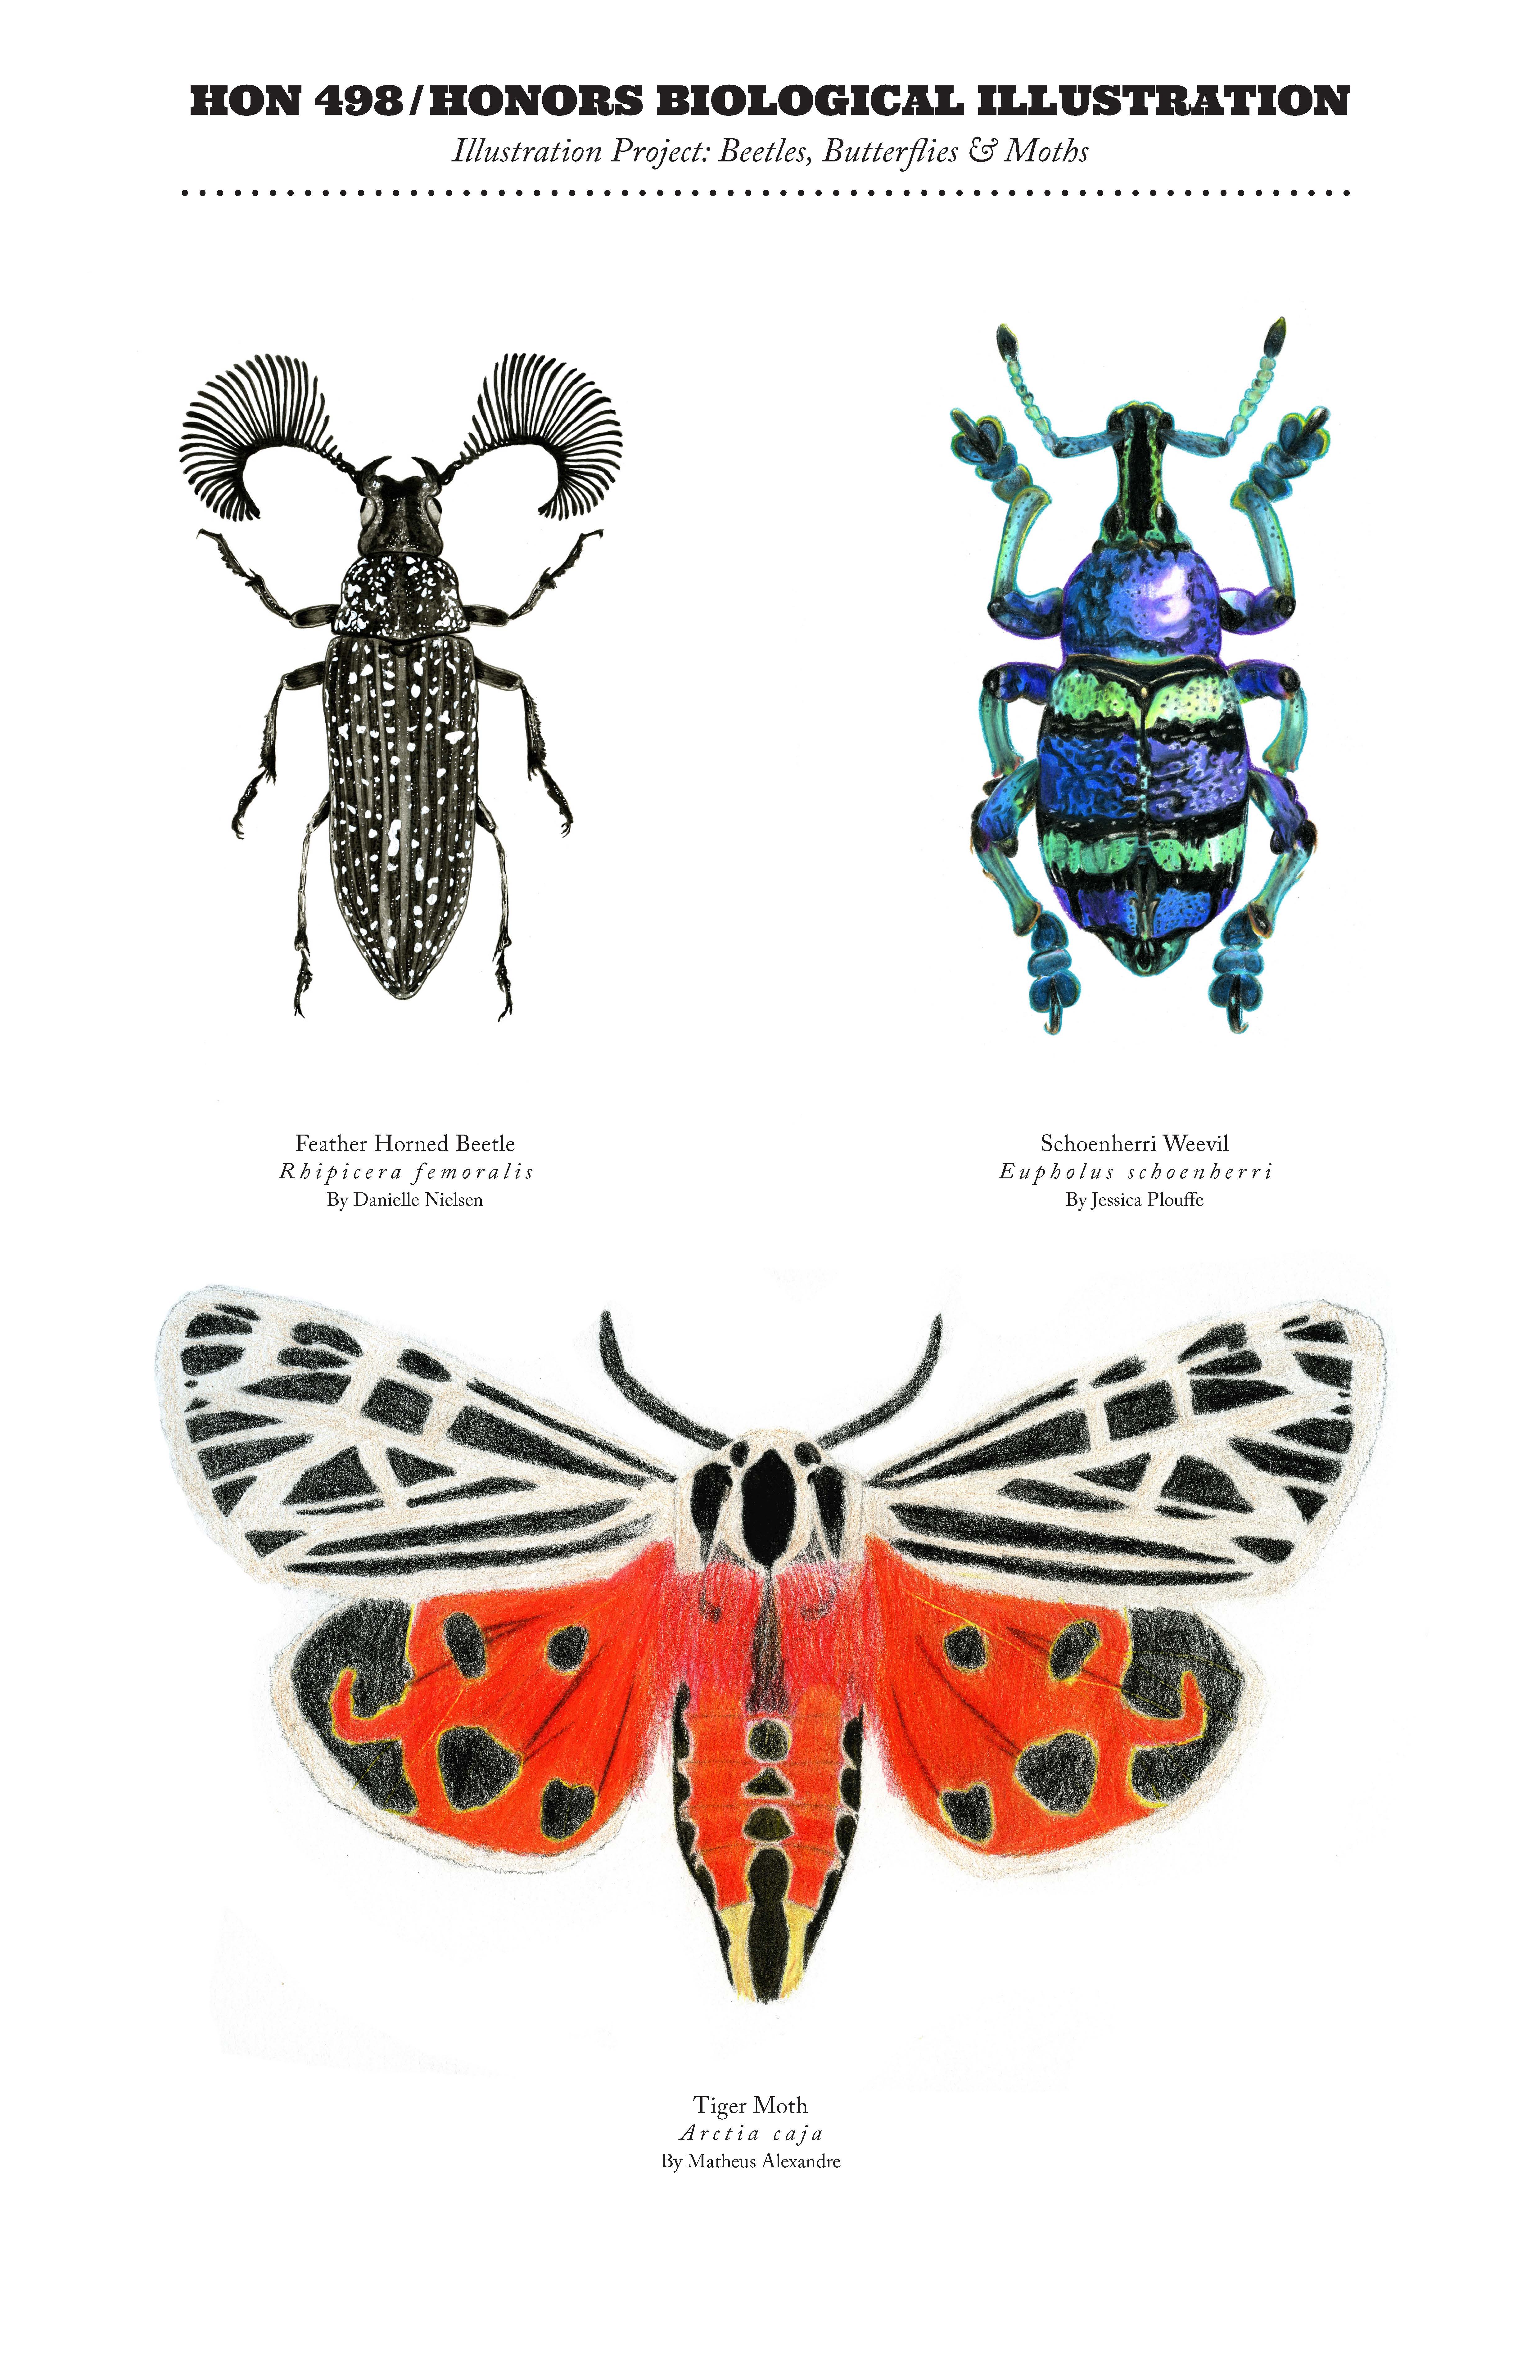 Drawings for Biological Illustration course. A black beetle with eyelash-like antennae is in the top left. On the top right is a blue beetle with green stripes. On the bottom is a moth that is white on top and red on the bottom.